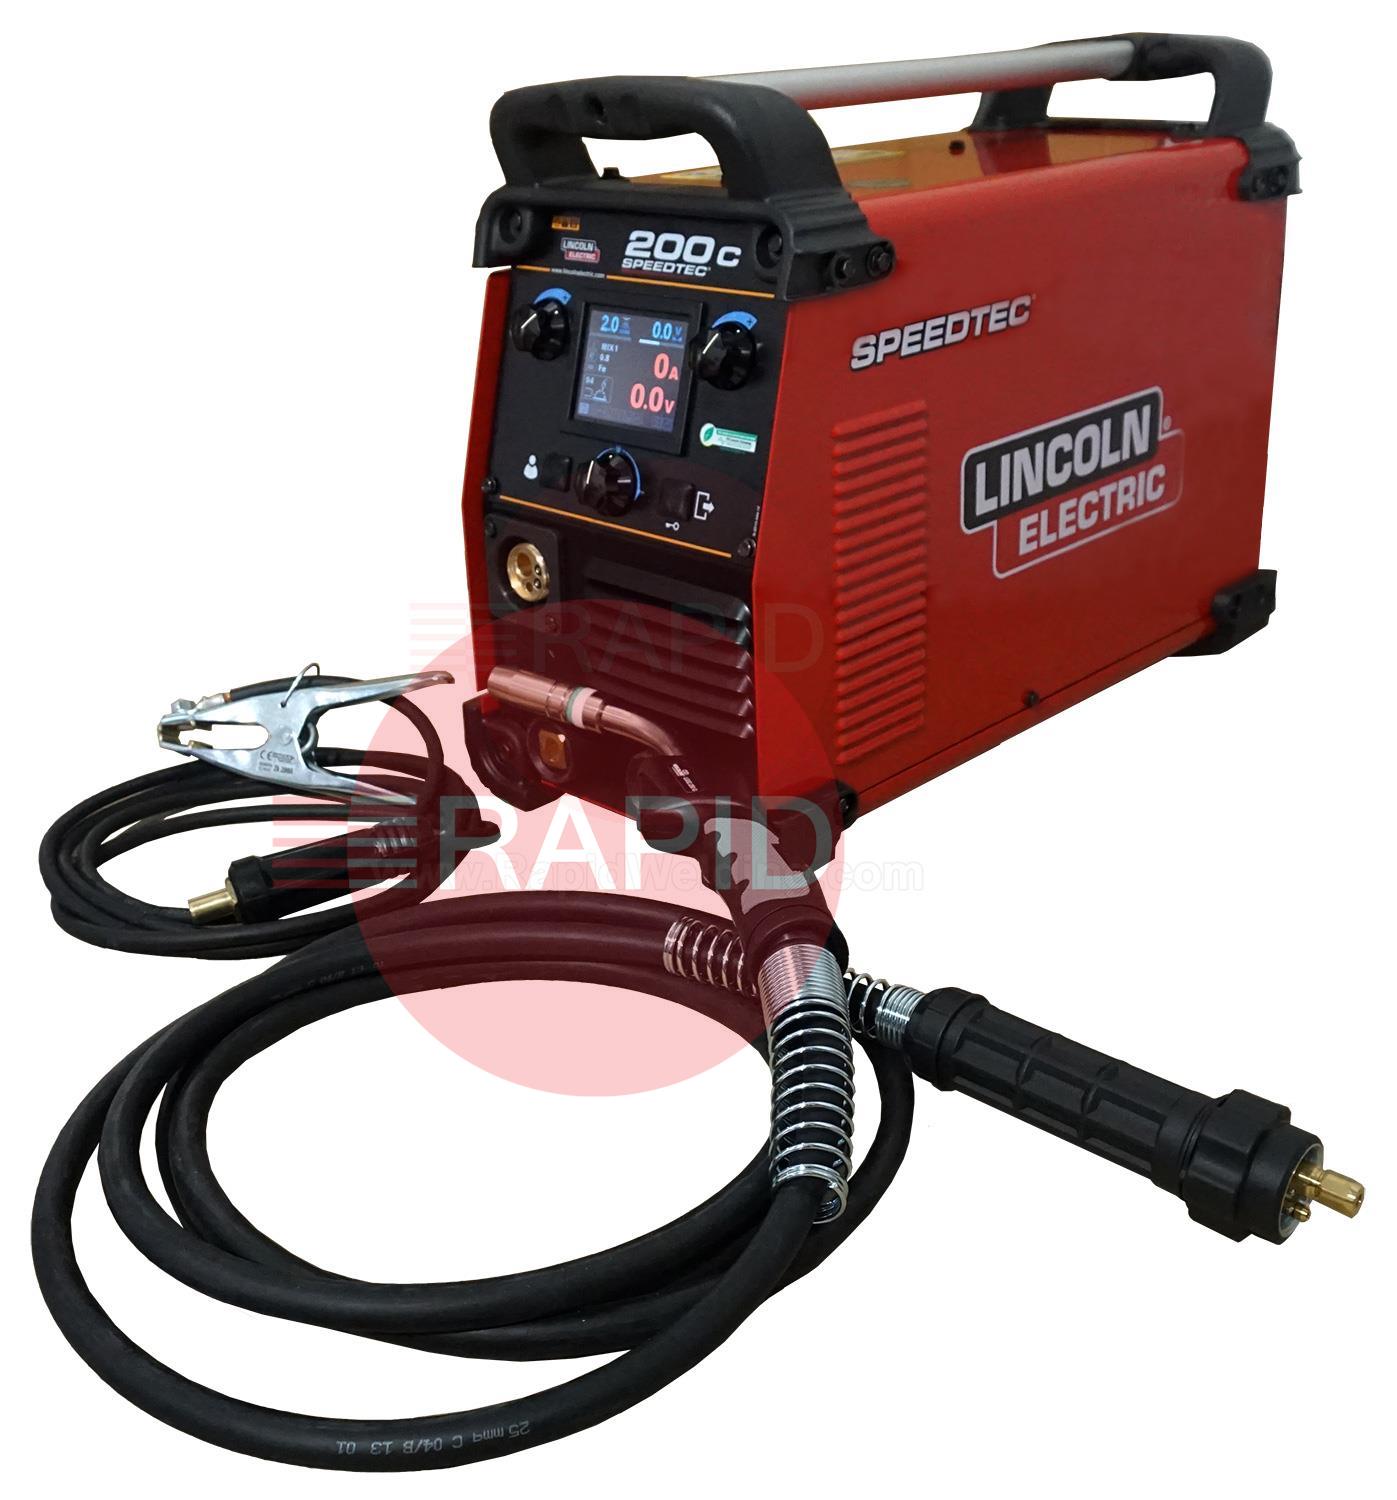 K14099-1P  Lincoln Speedtec 200C Ready to Weld MIG Package, 230v